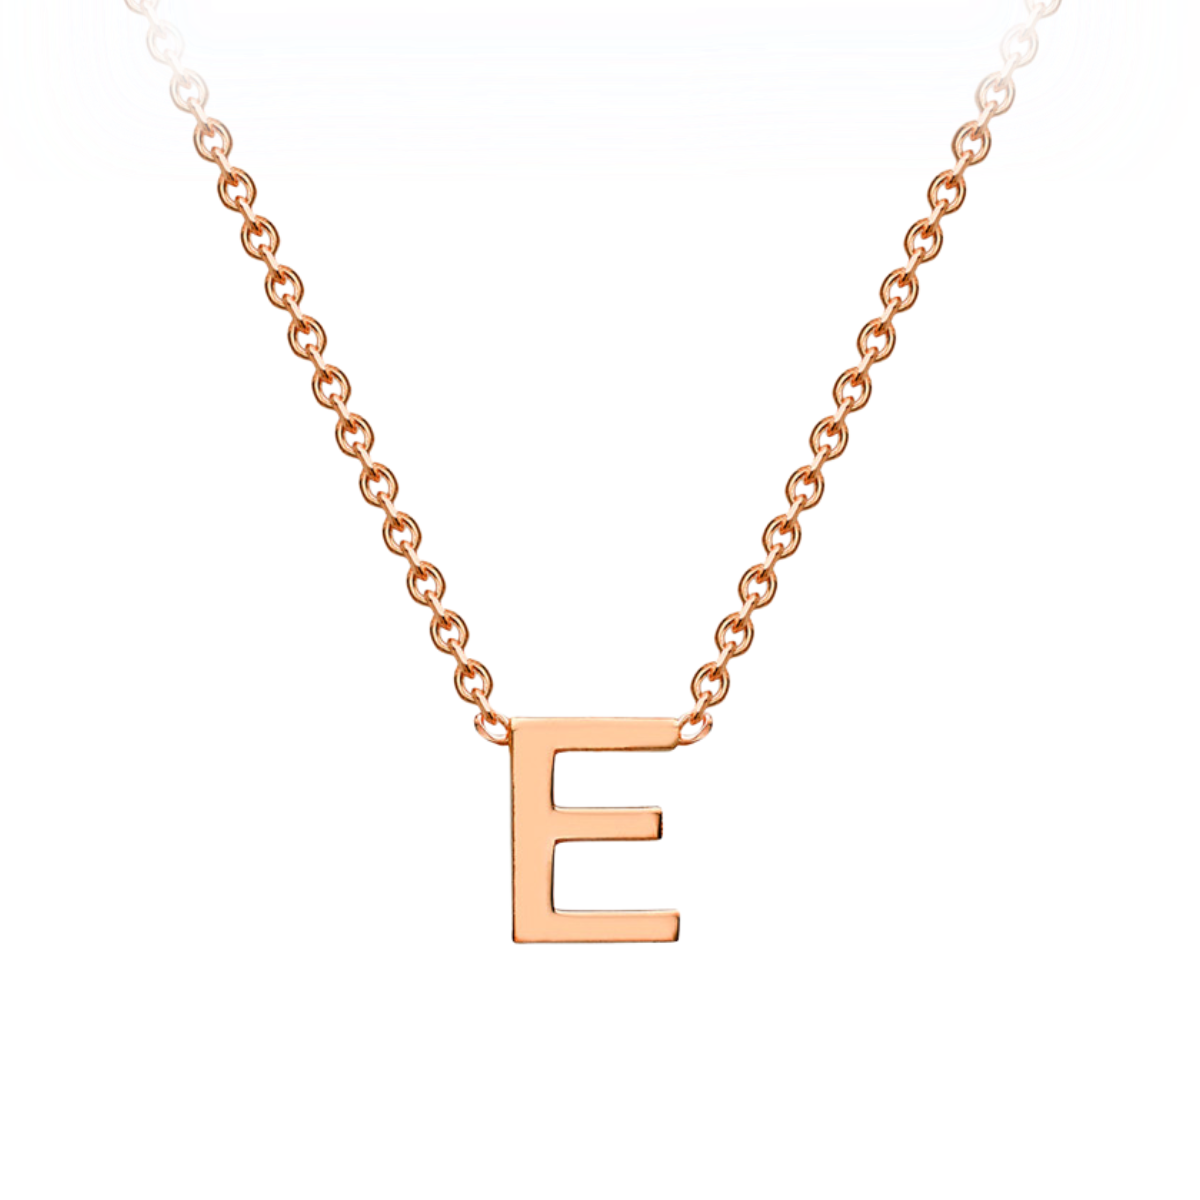 PETITE 'E' INITIAL NECKLACE | 9K SOLID ROSE GOLD